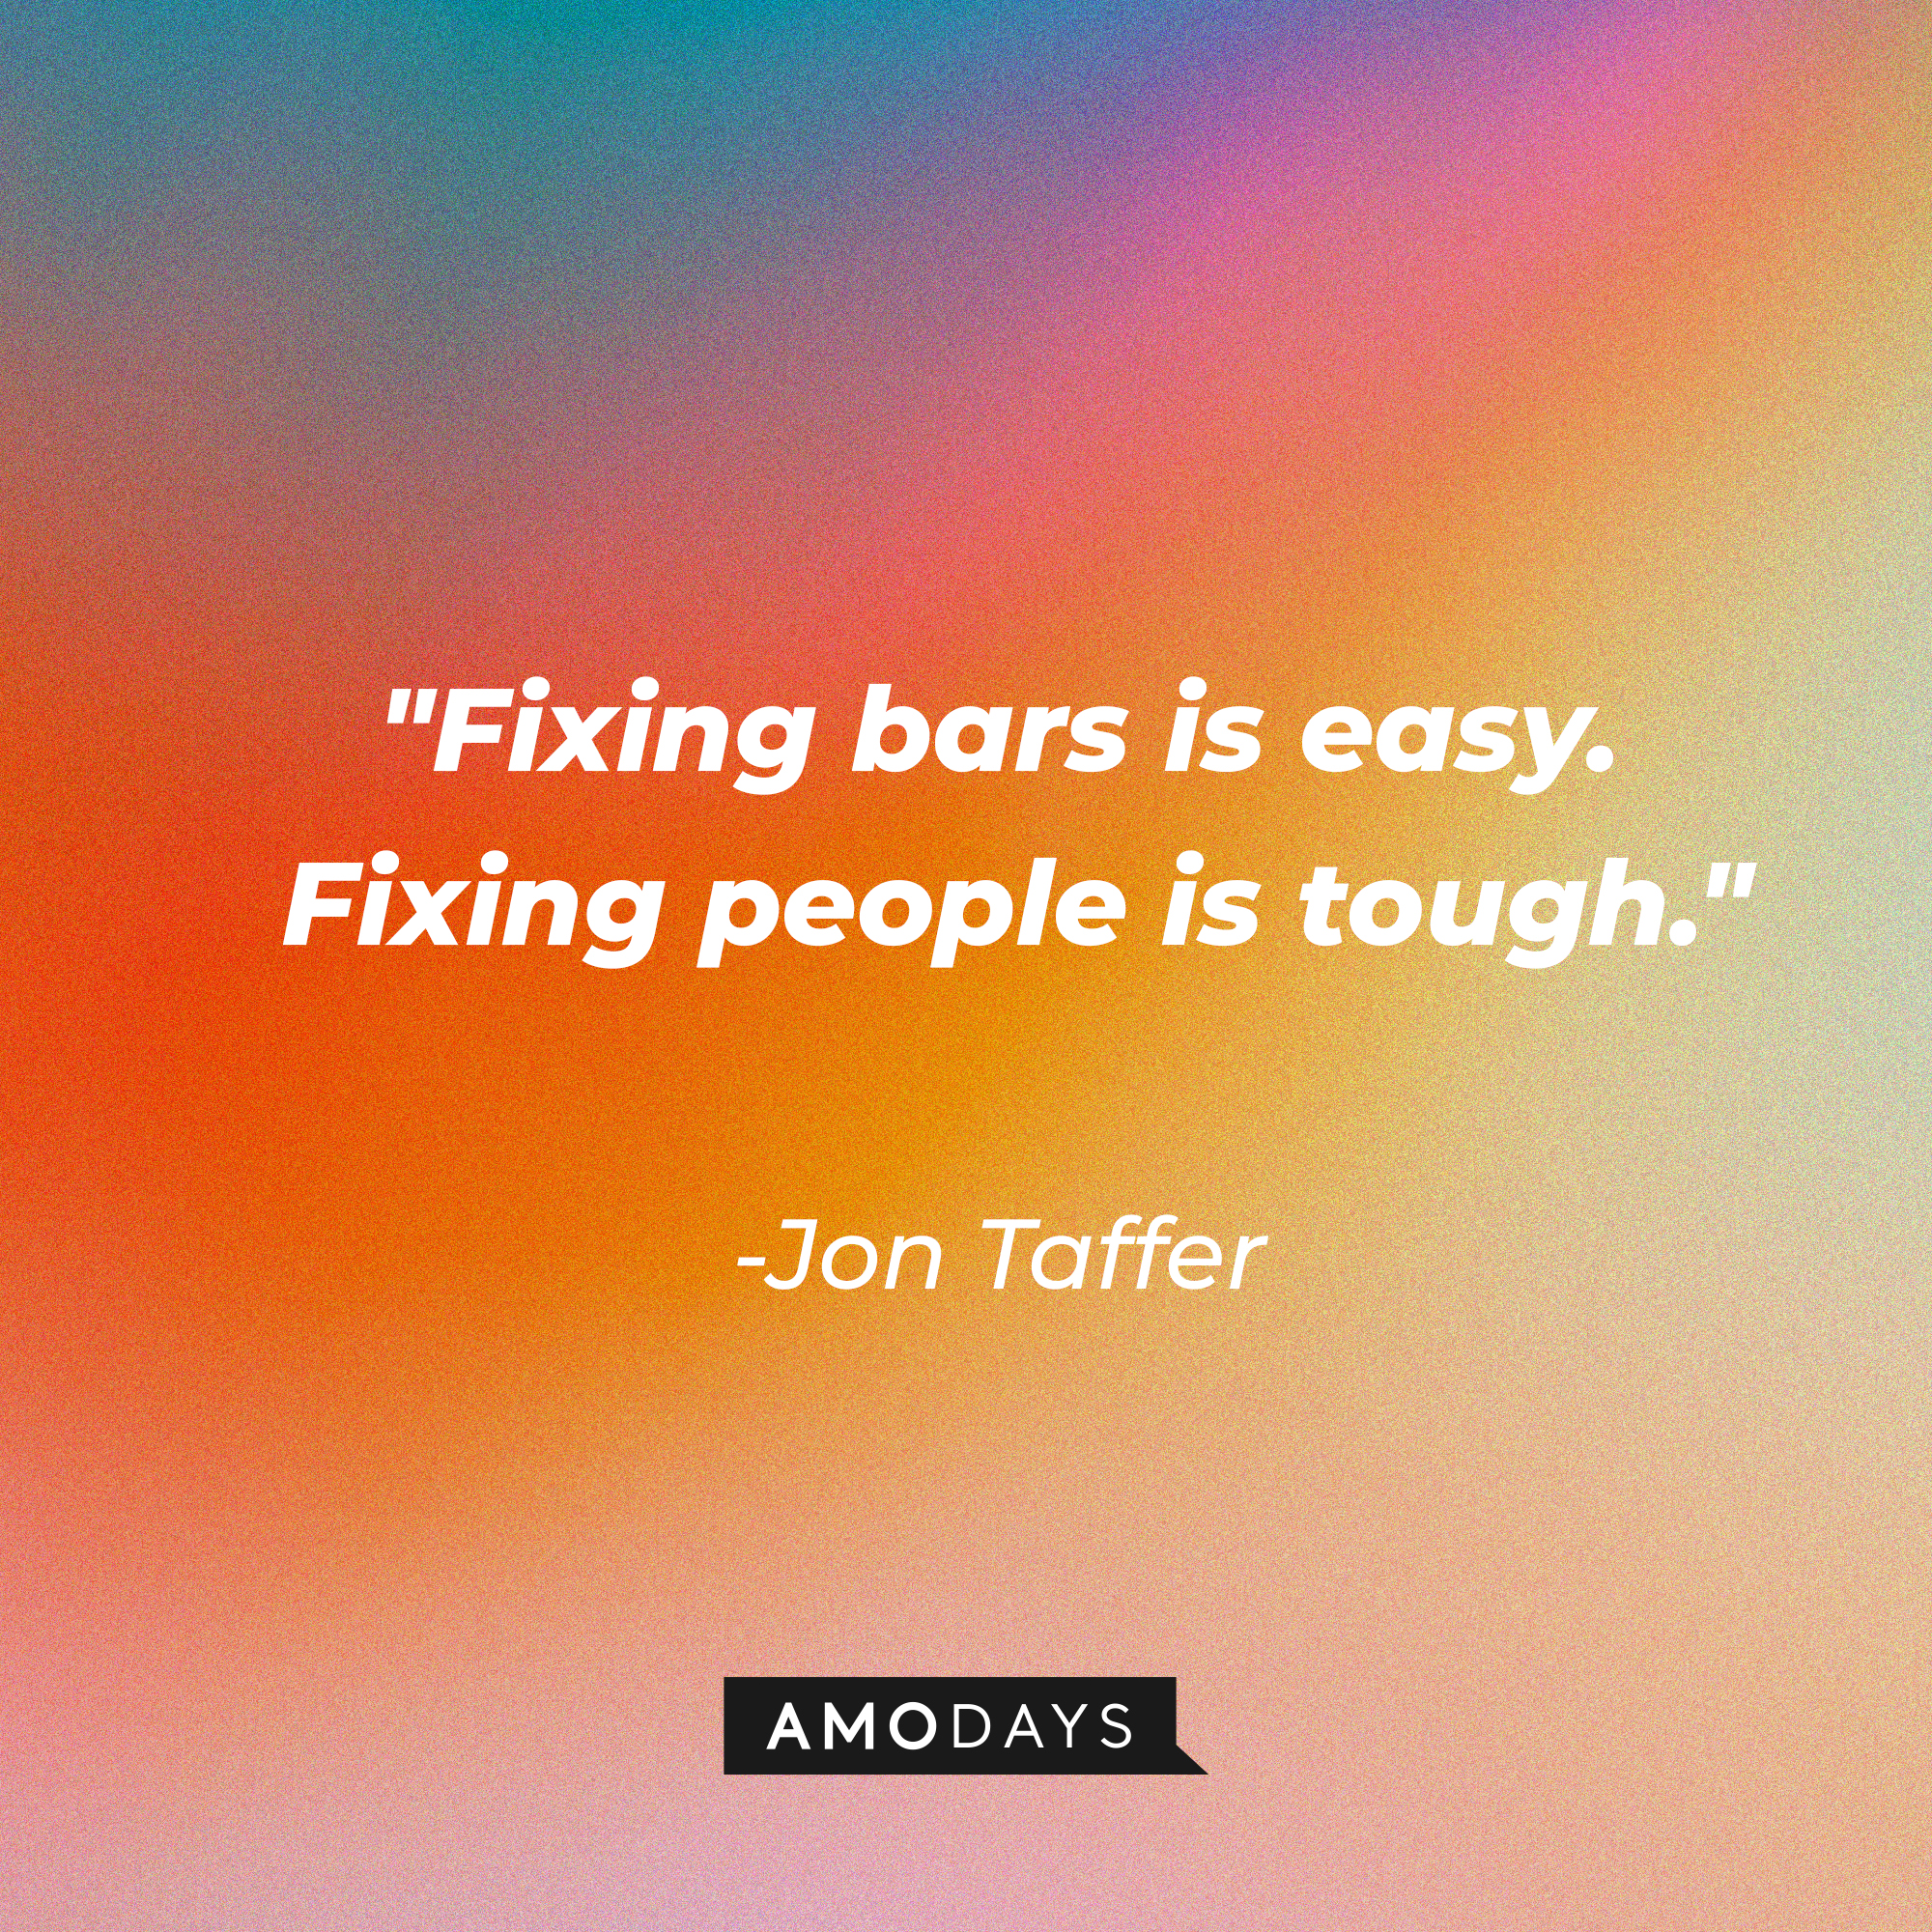 Jon Taffer's quote, "Fixing bars is easy. Fixing people is tough." | Image: AmoDays